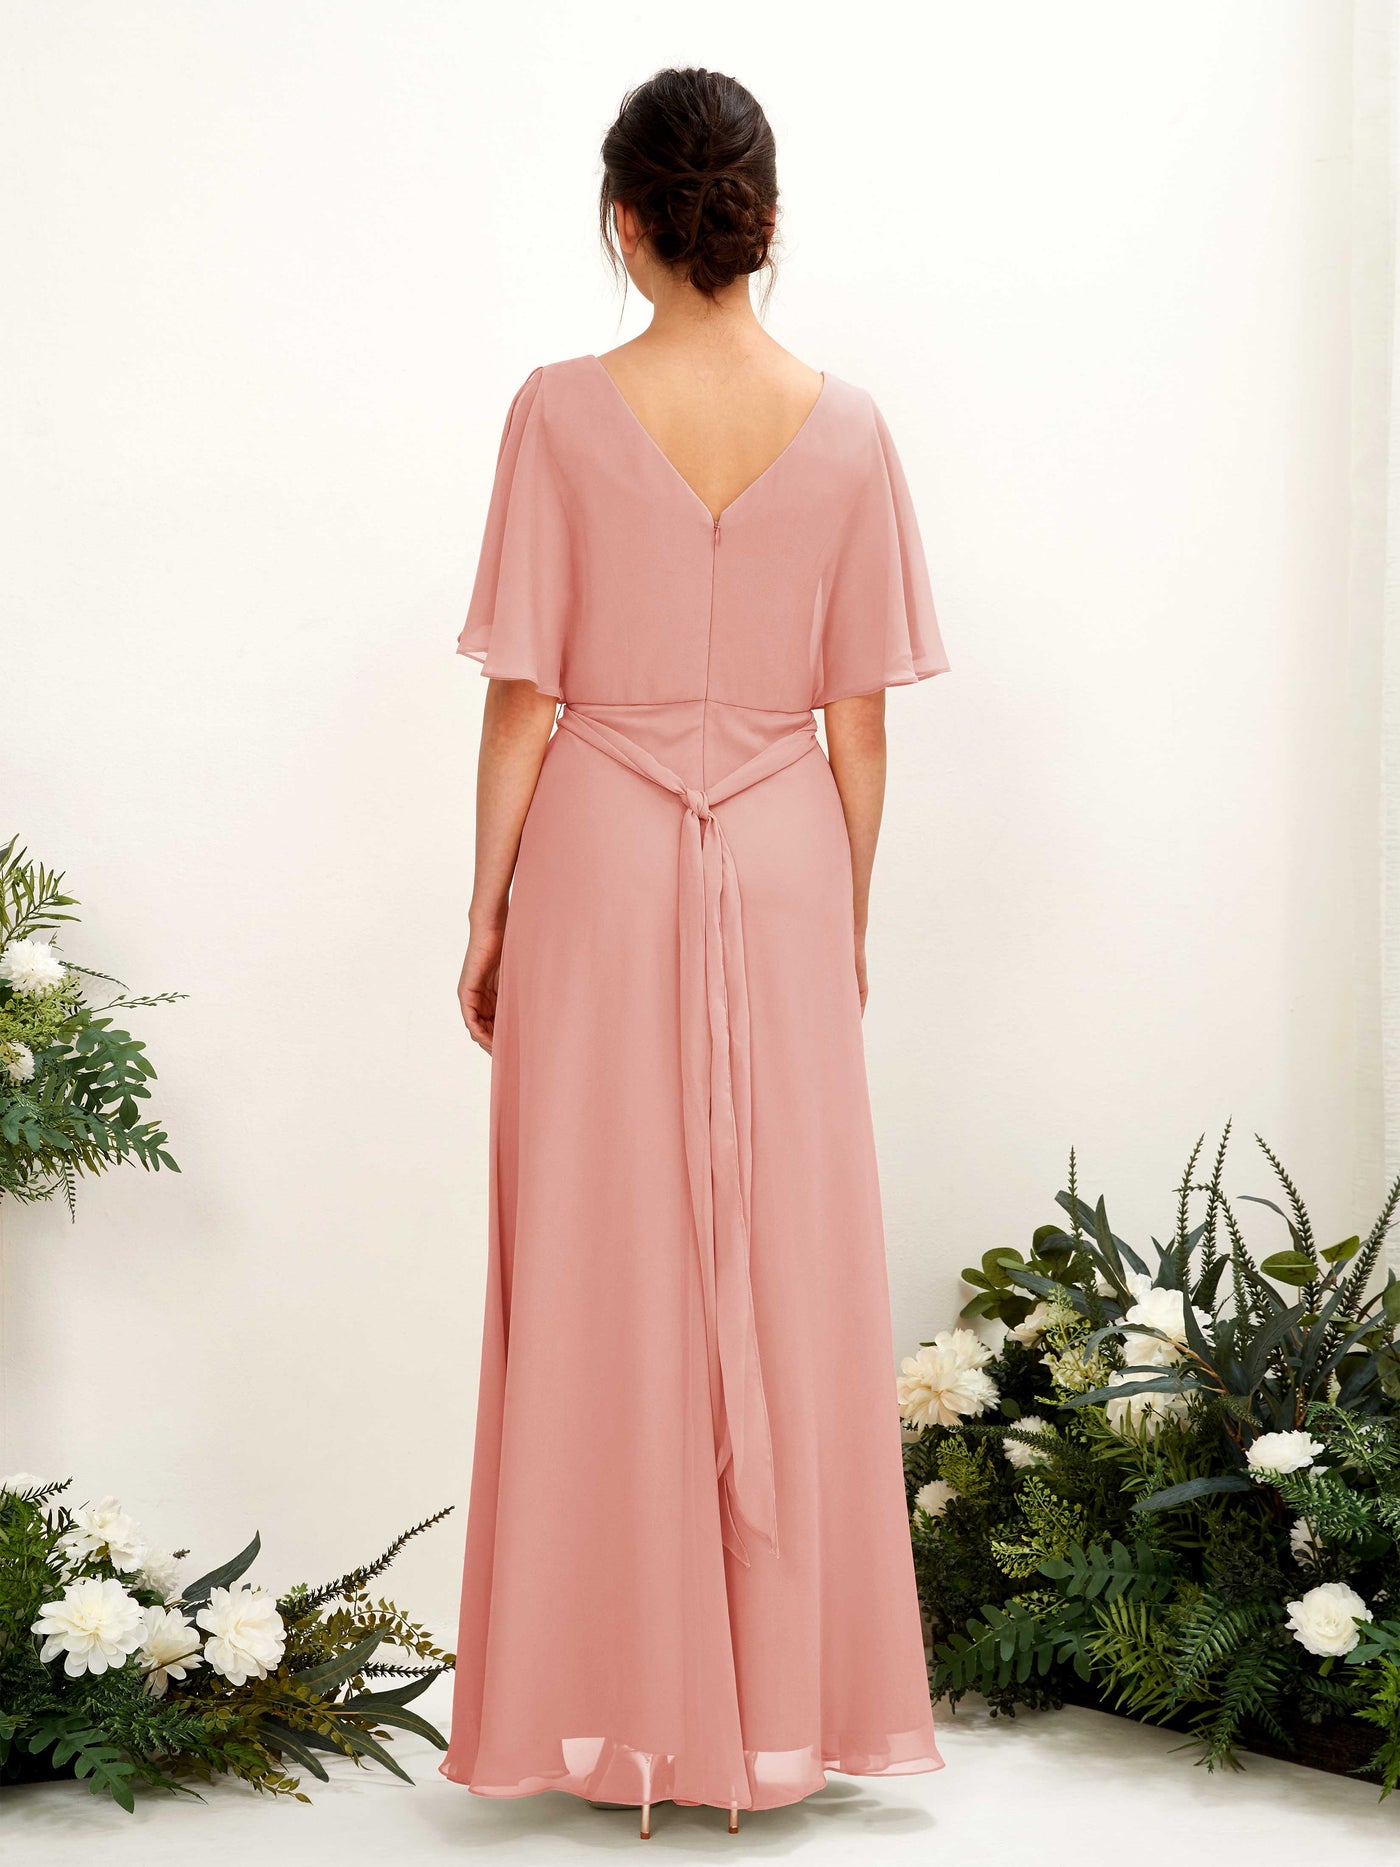 Champagne Rose Bridesmaid Dresses Bridesmaid Dress A-line Chiffon V-neck Full Length Short Sleeves Wedding Party Dress (81222406)#color_champagne-rose